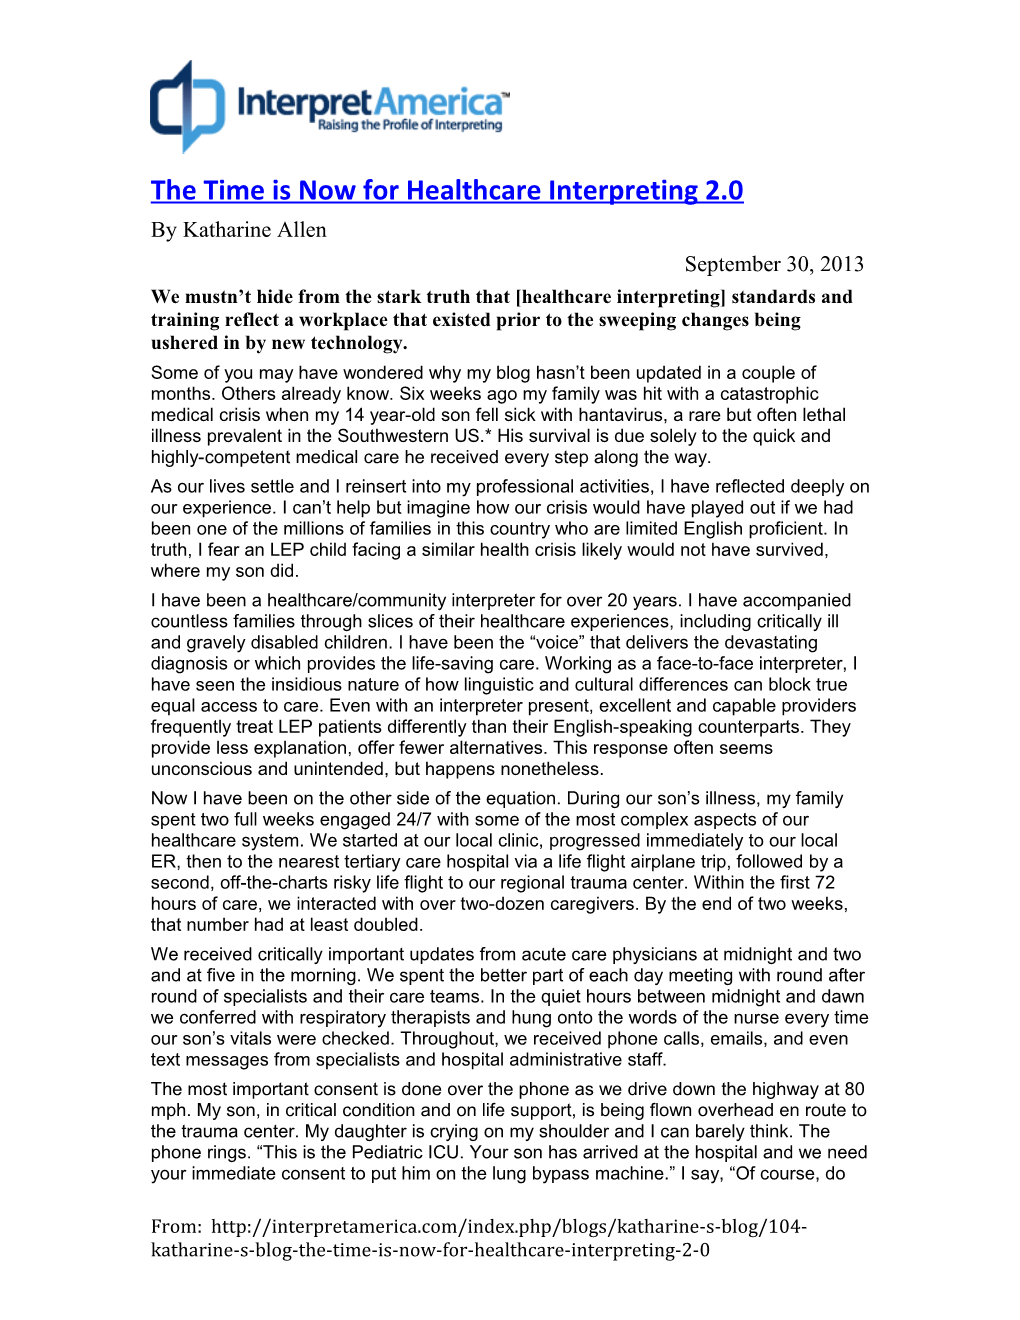 The Time Is Now for Healthcare Interpreting 2.0